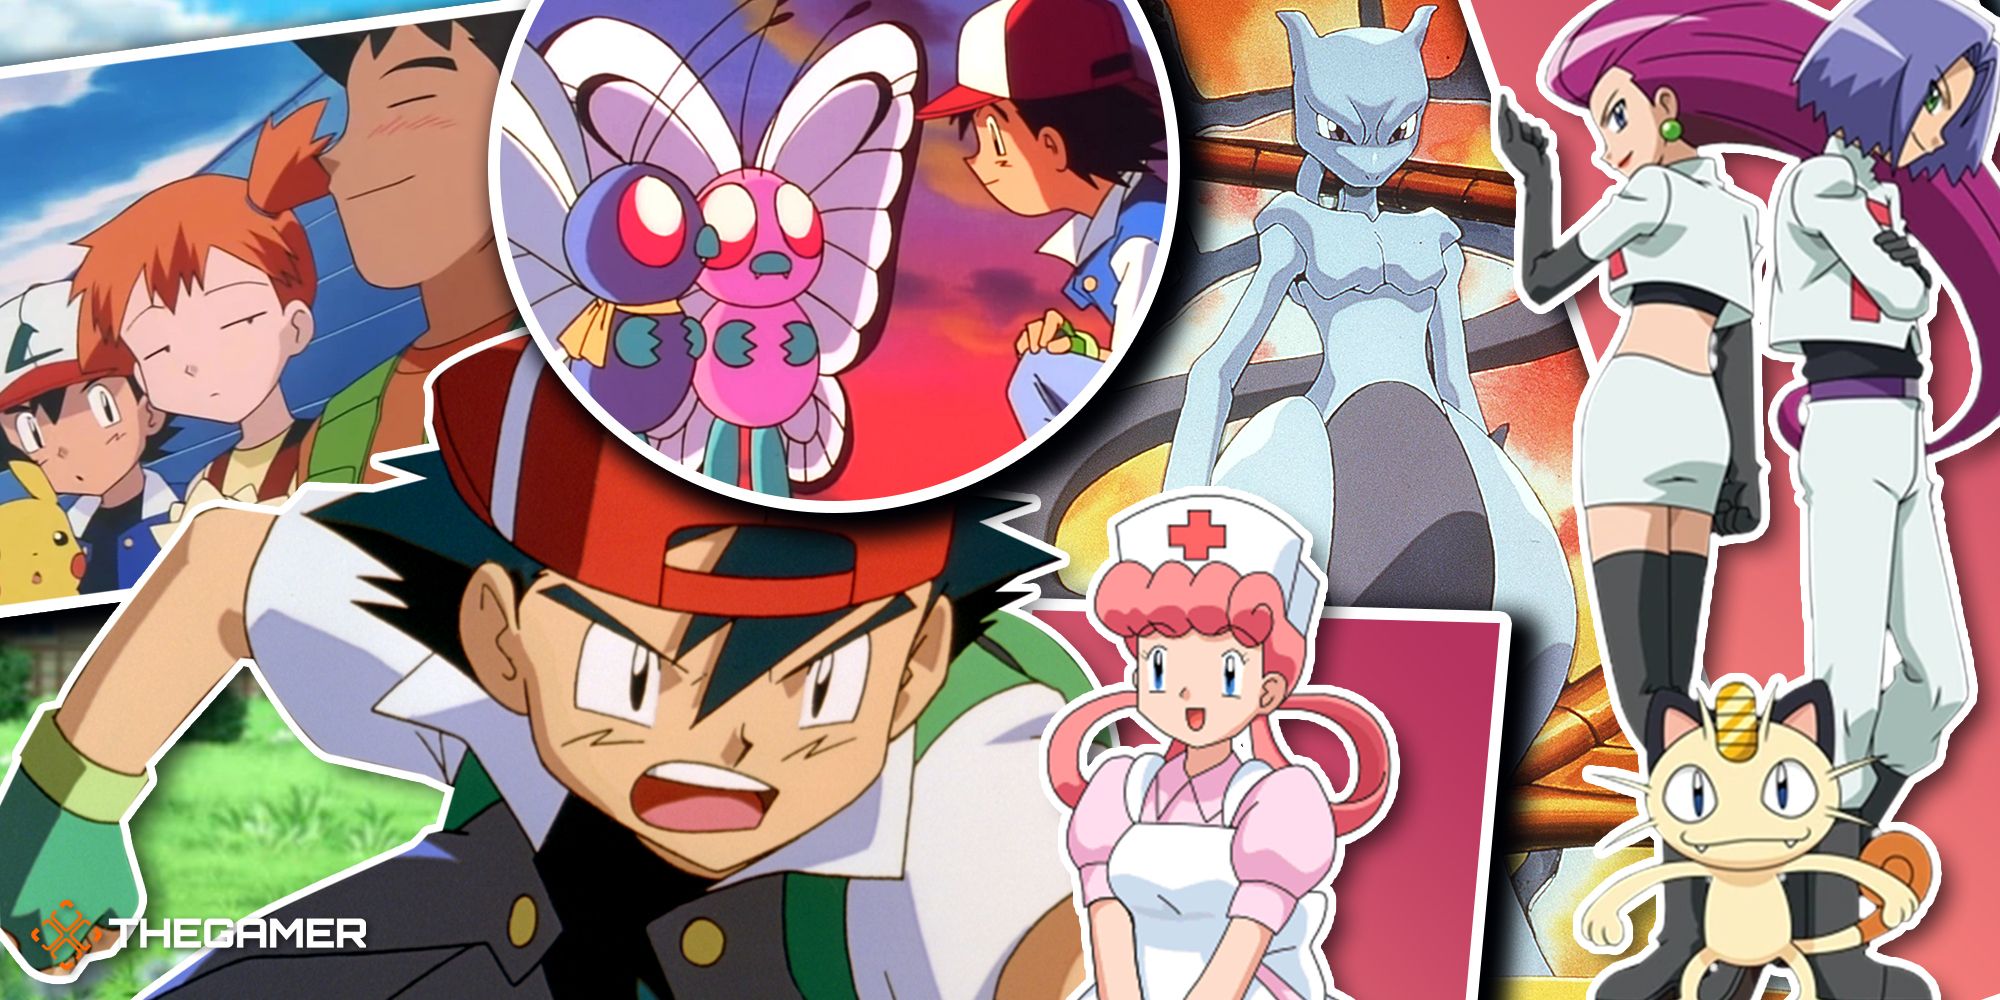 A collage of Misty, Ash, Brock, Butterfree, Nurse Joy, Team Rocket, Meowth, and Mewtwo from the Pokemon Anime and Pokemon: The First Movie.